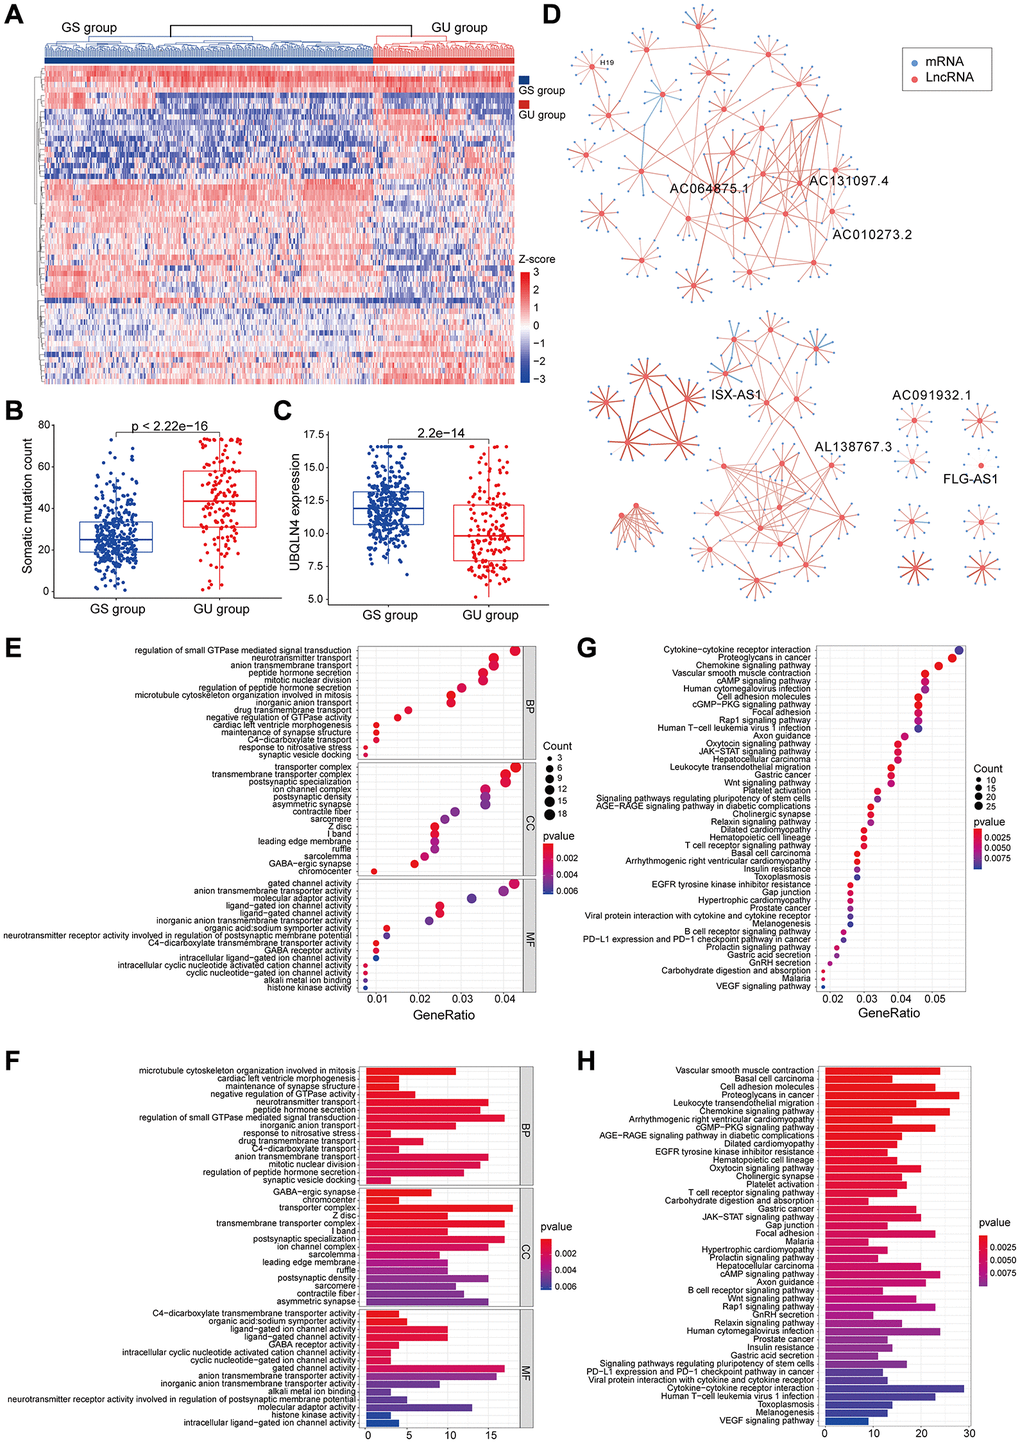 Identified and functionally interpreted genomic instability-associated lncRNAs in patients with low-grade gliomas. (A) An unsupervised clustering among 529 patients with low-grade glioma was performed based on the expression patterns of 59 candidate genomic instability-associated lncRNAs. The GS group is shown in blue on the left, whereas the GU group is shown in red on the right. (B) Box plots for somatic mutations of GS and GU groups. Cumulative somatic mutations in the GU group were significantly higher compared with those in the GS group. (C) Box plots of the expression levels of UBQLN4 in the GU and GS groups. Expression levels of UBQLN4 were significantly lower in the GU group compared with the levels in the GS group. (D) Pearson correlation coefficient analysis based genomic instability-associated lncRNA and mRNA co-expression network. (E–H) GO and KEGG functional enrichment analysis of lncRNA co-expression mRNA through.